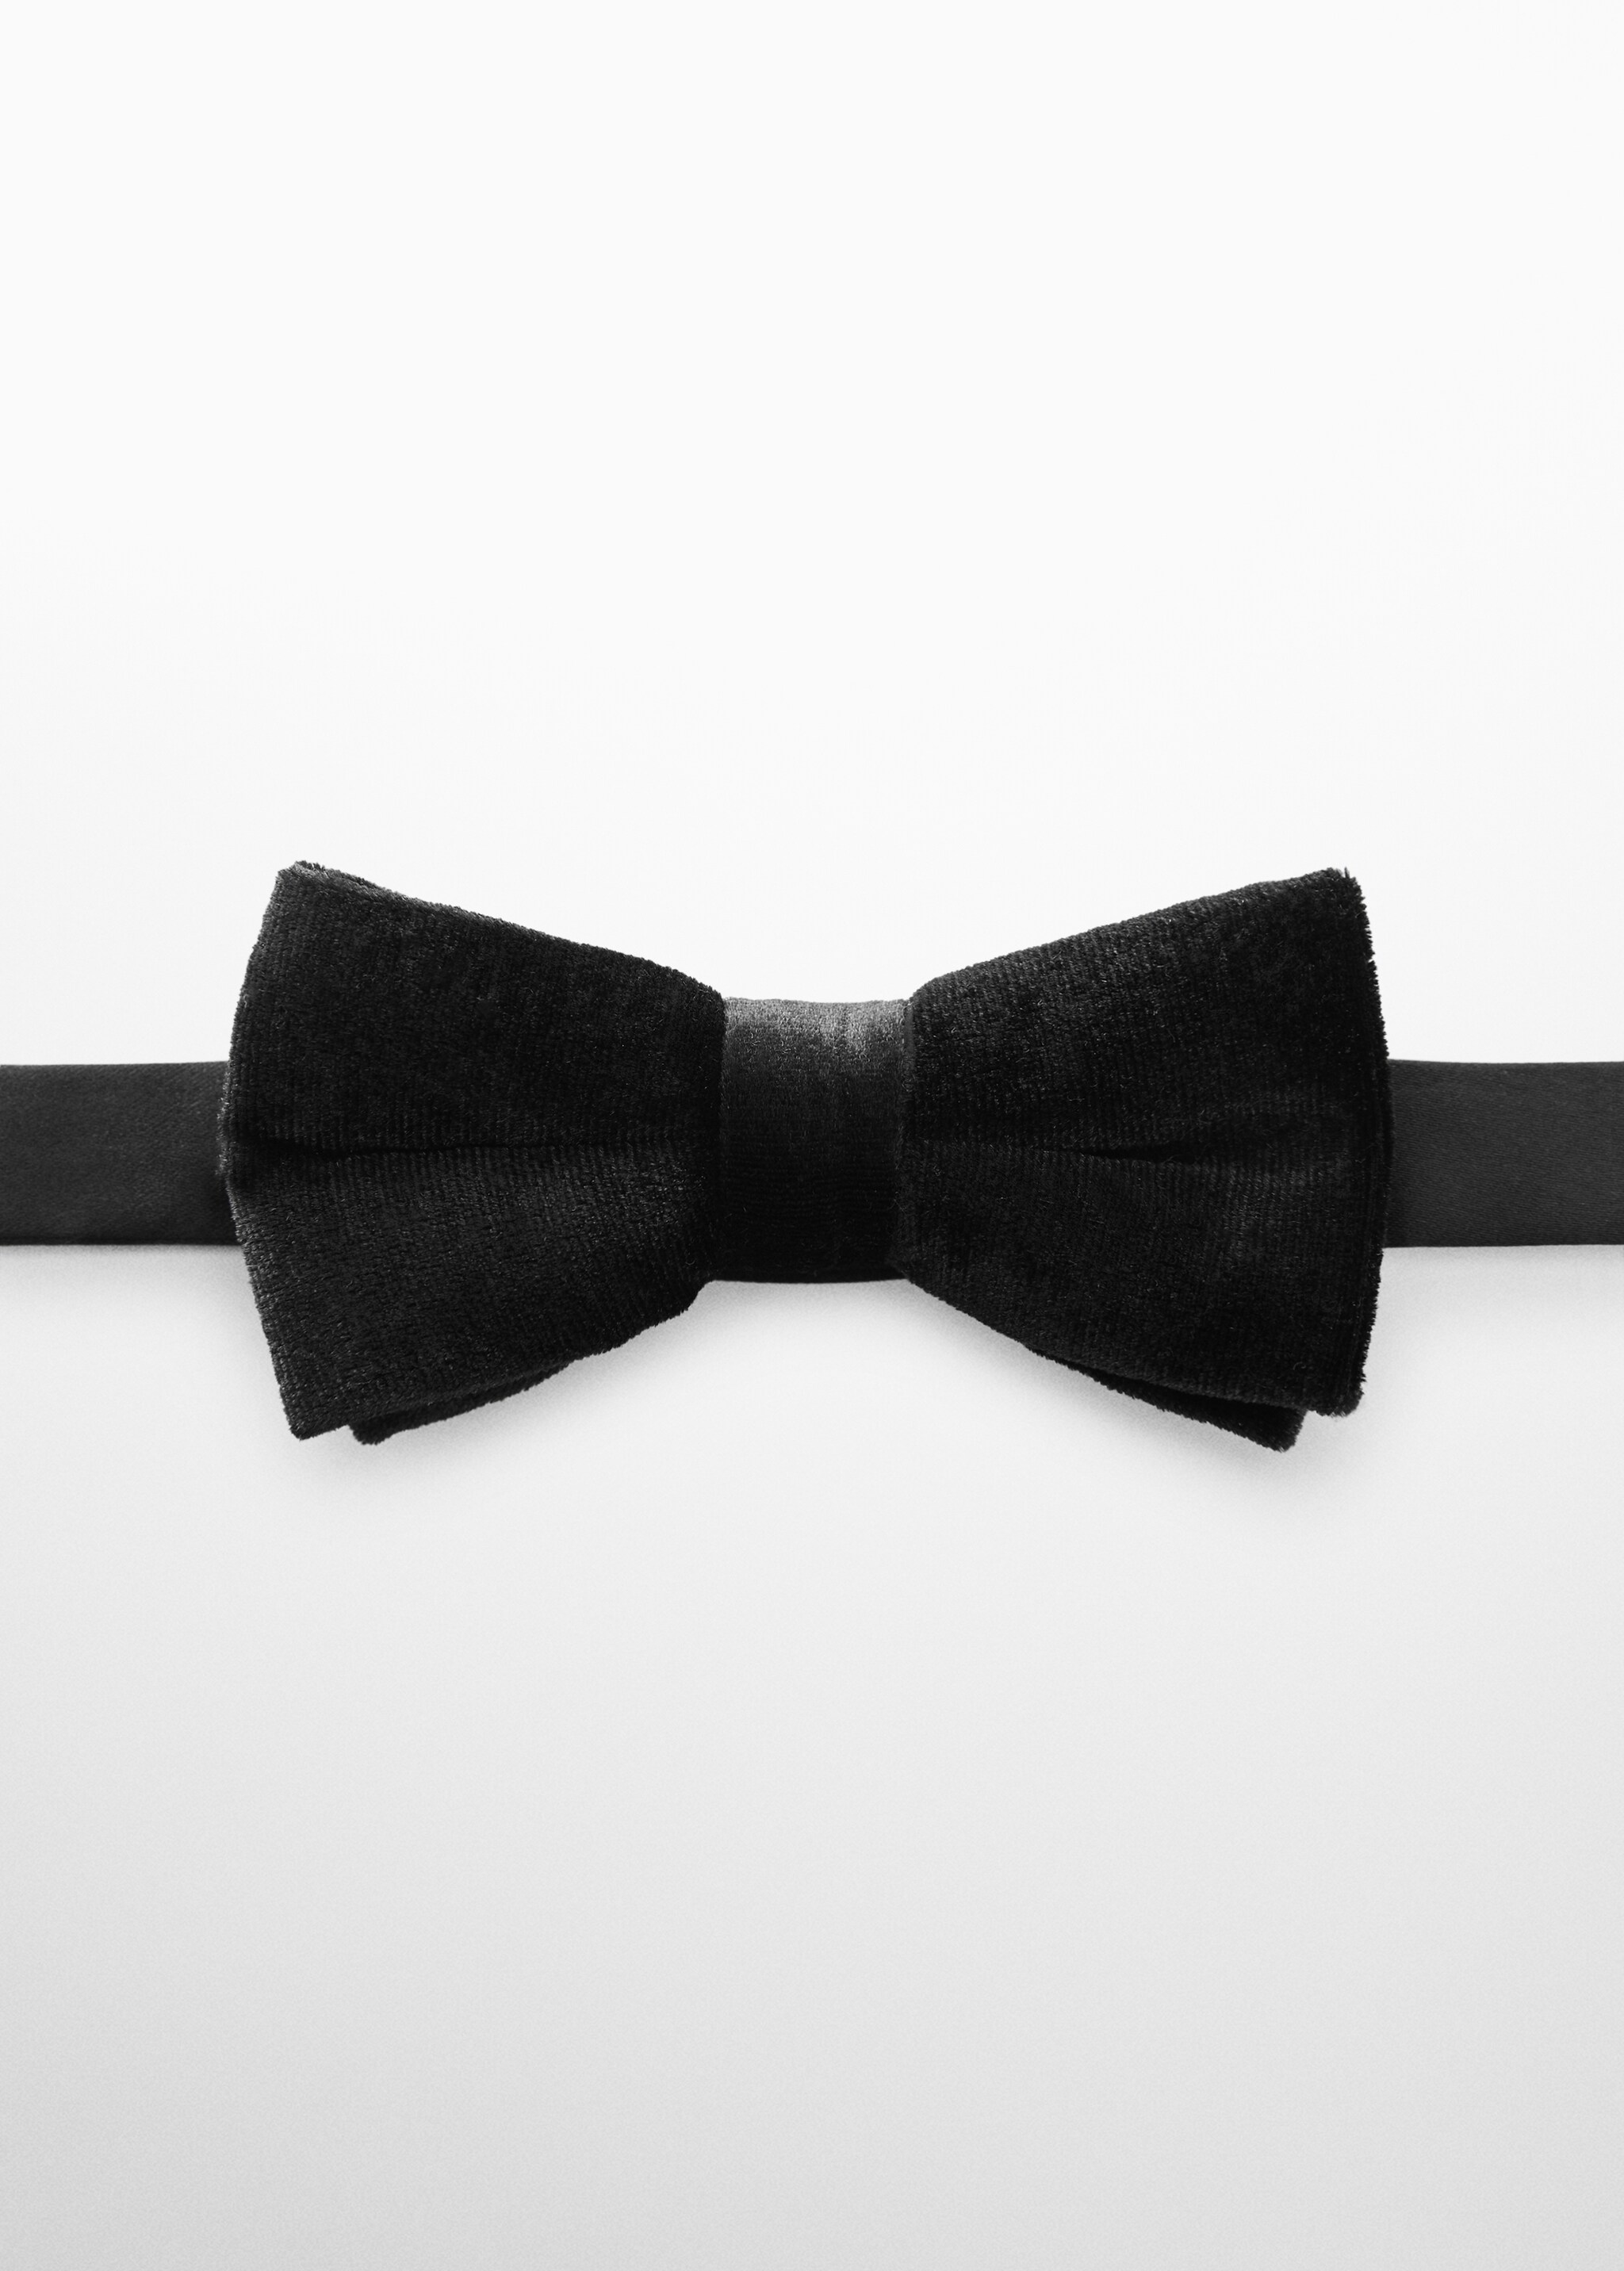 Velvet bow tie - Article without model